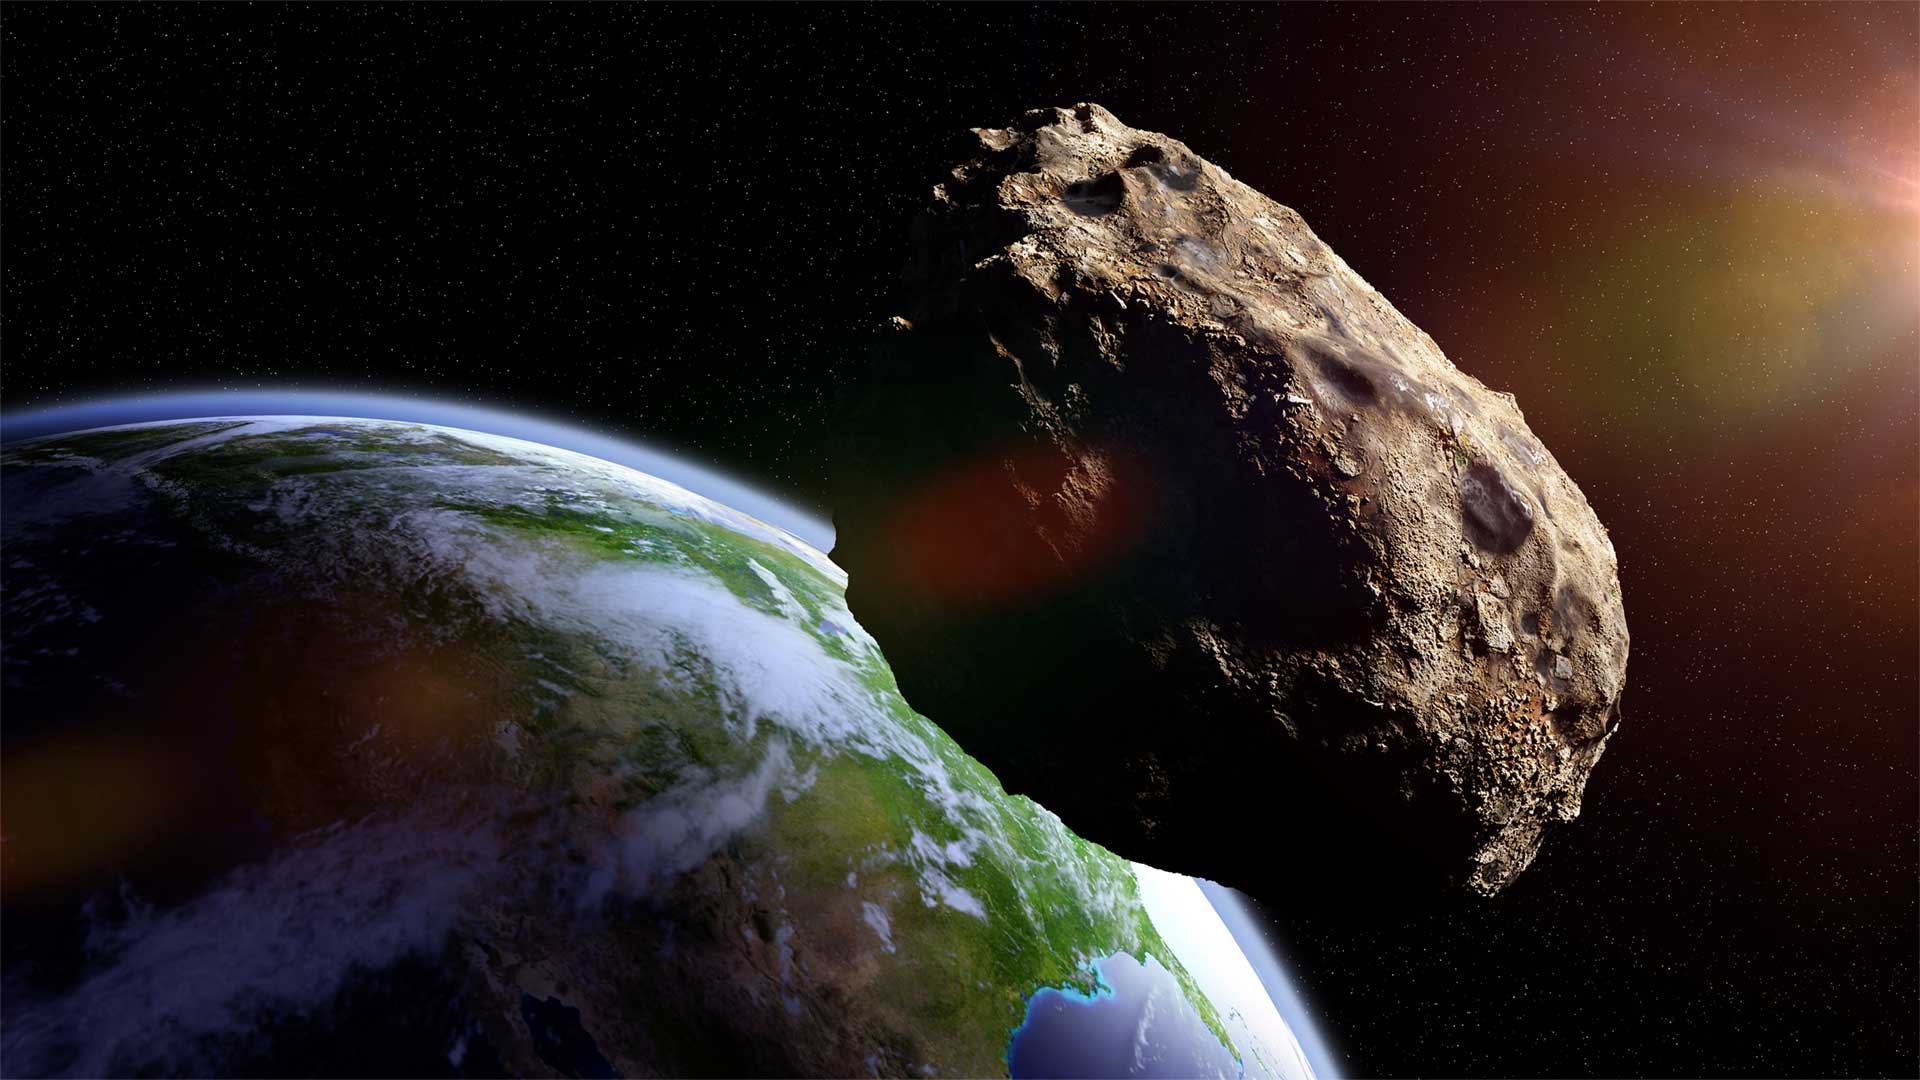 Asteroid the size of a car
